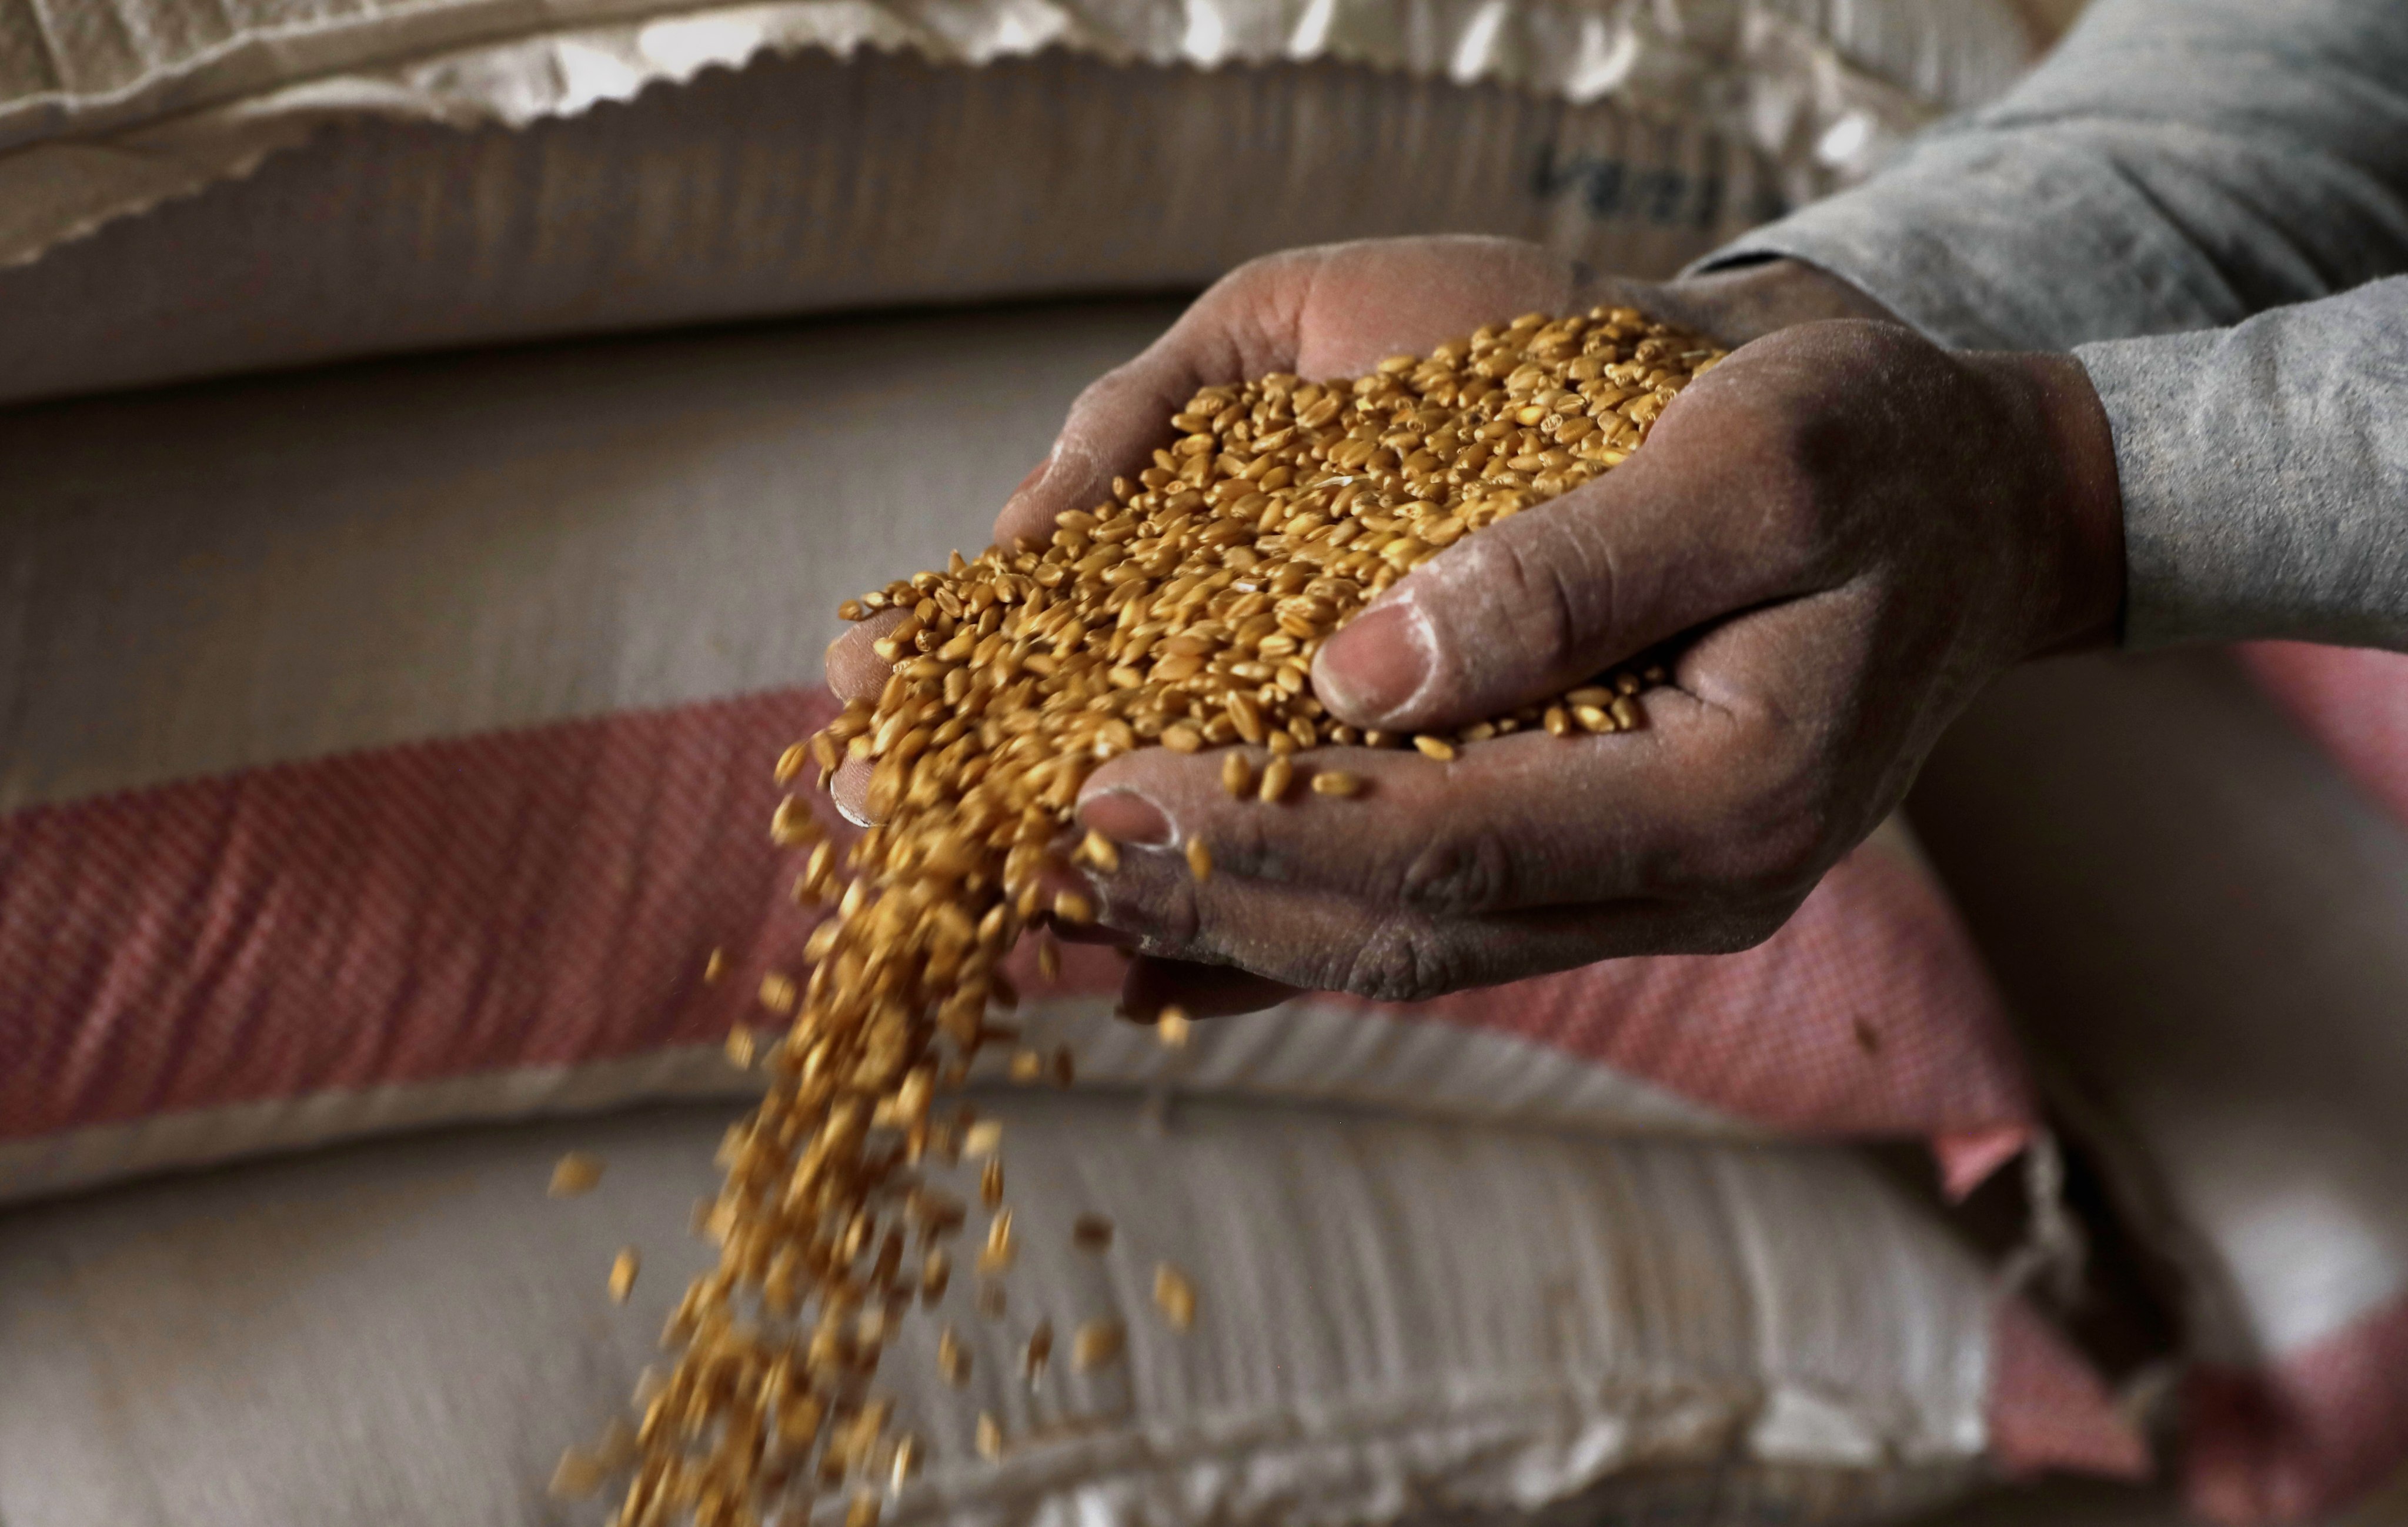 A worker holds imported wheat grain as he works at a flour mill in Sana’a, Yemen, on March 23. The Russian invasion of Ukraine is causing shortages of wheat and food price spikes in war-ravaged Yemen, which imports almost 90 per cent of its wheat, including more than 30 per cent from Ukraine and at least 8 per cent from Russia. Photo: EPA-EFE